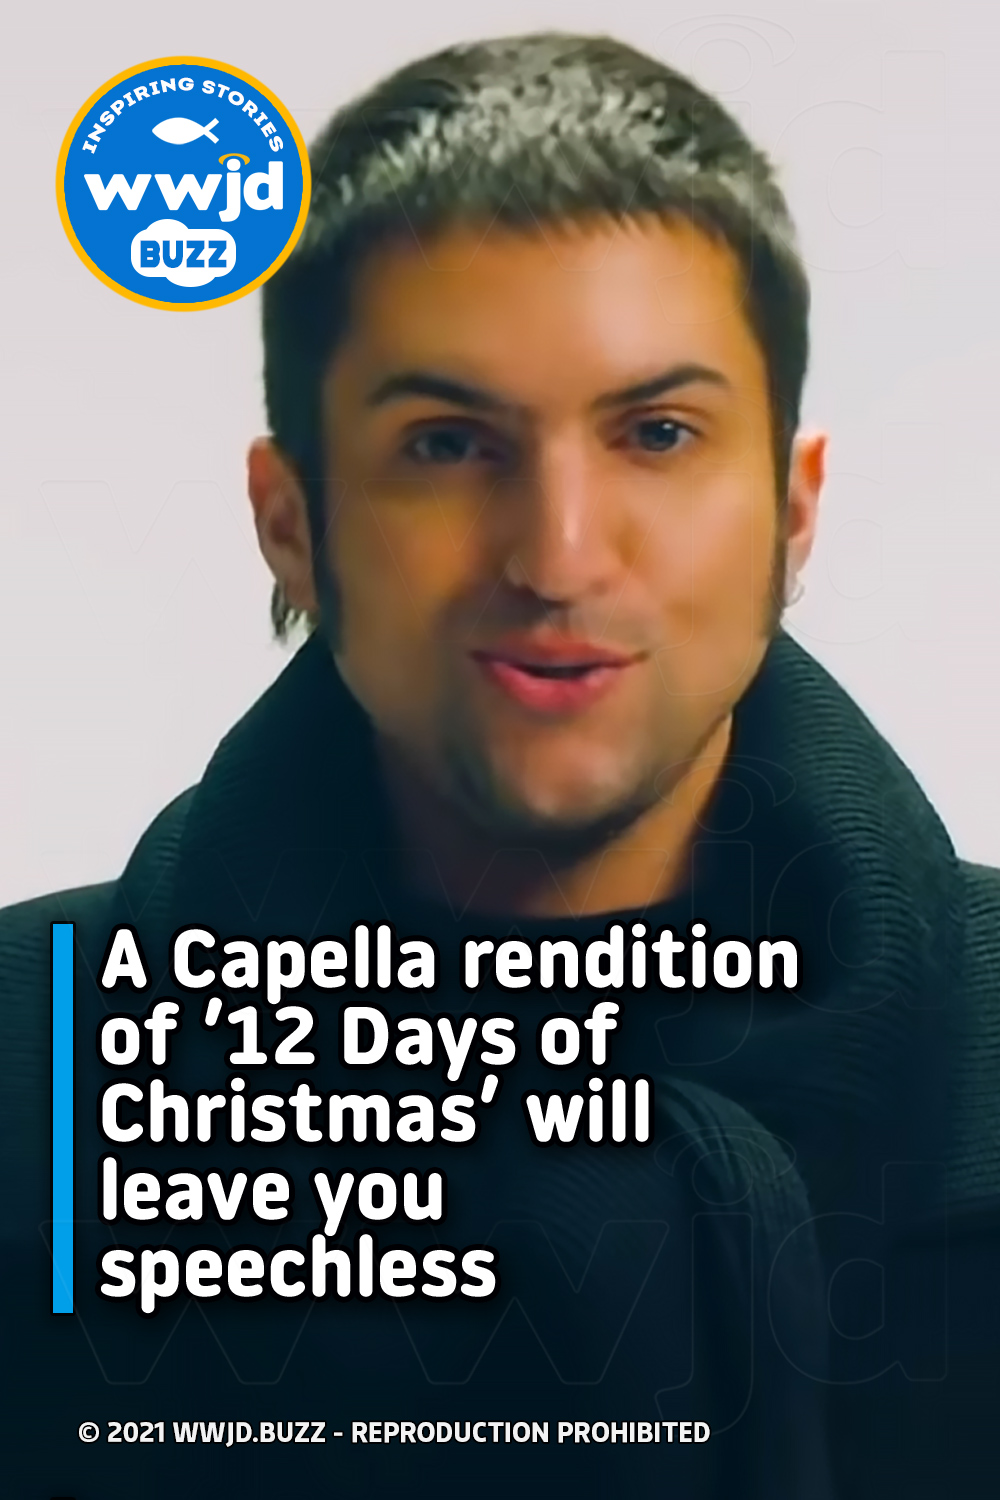 A Capella rendition of ’12 Days of Christmas’ will leave you speechless